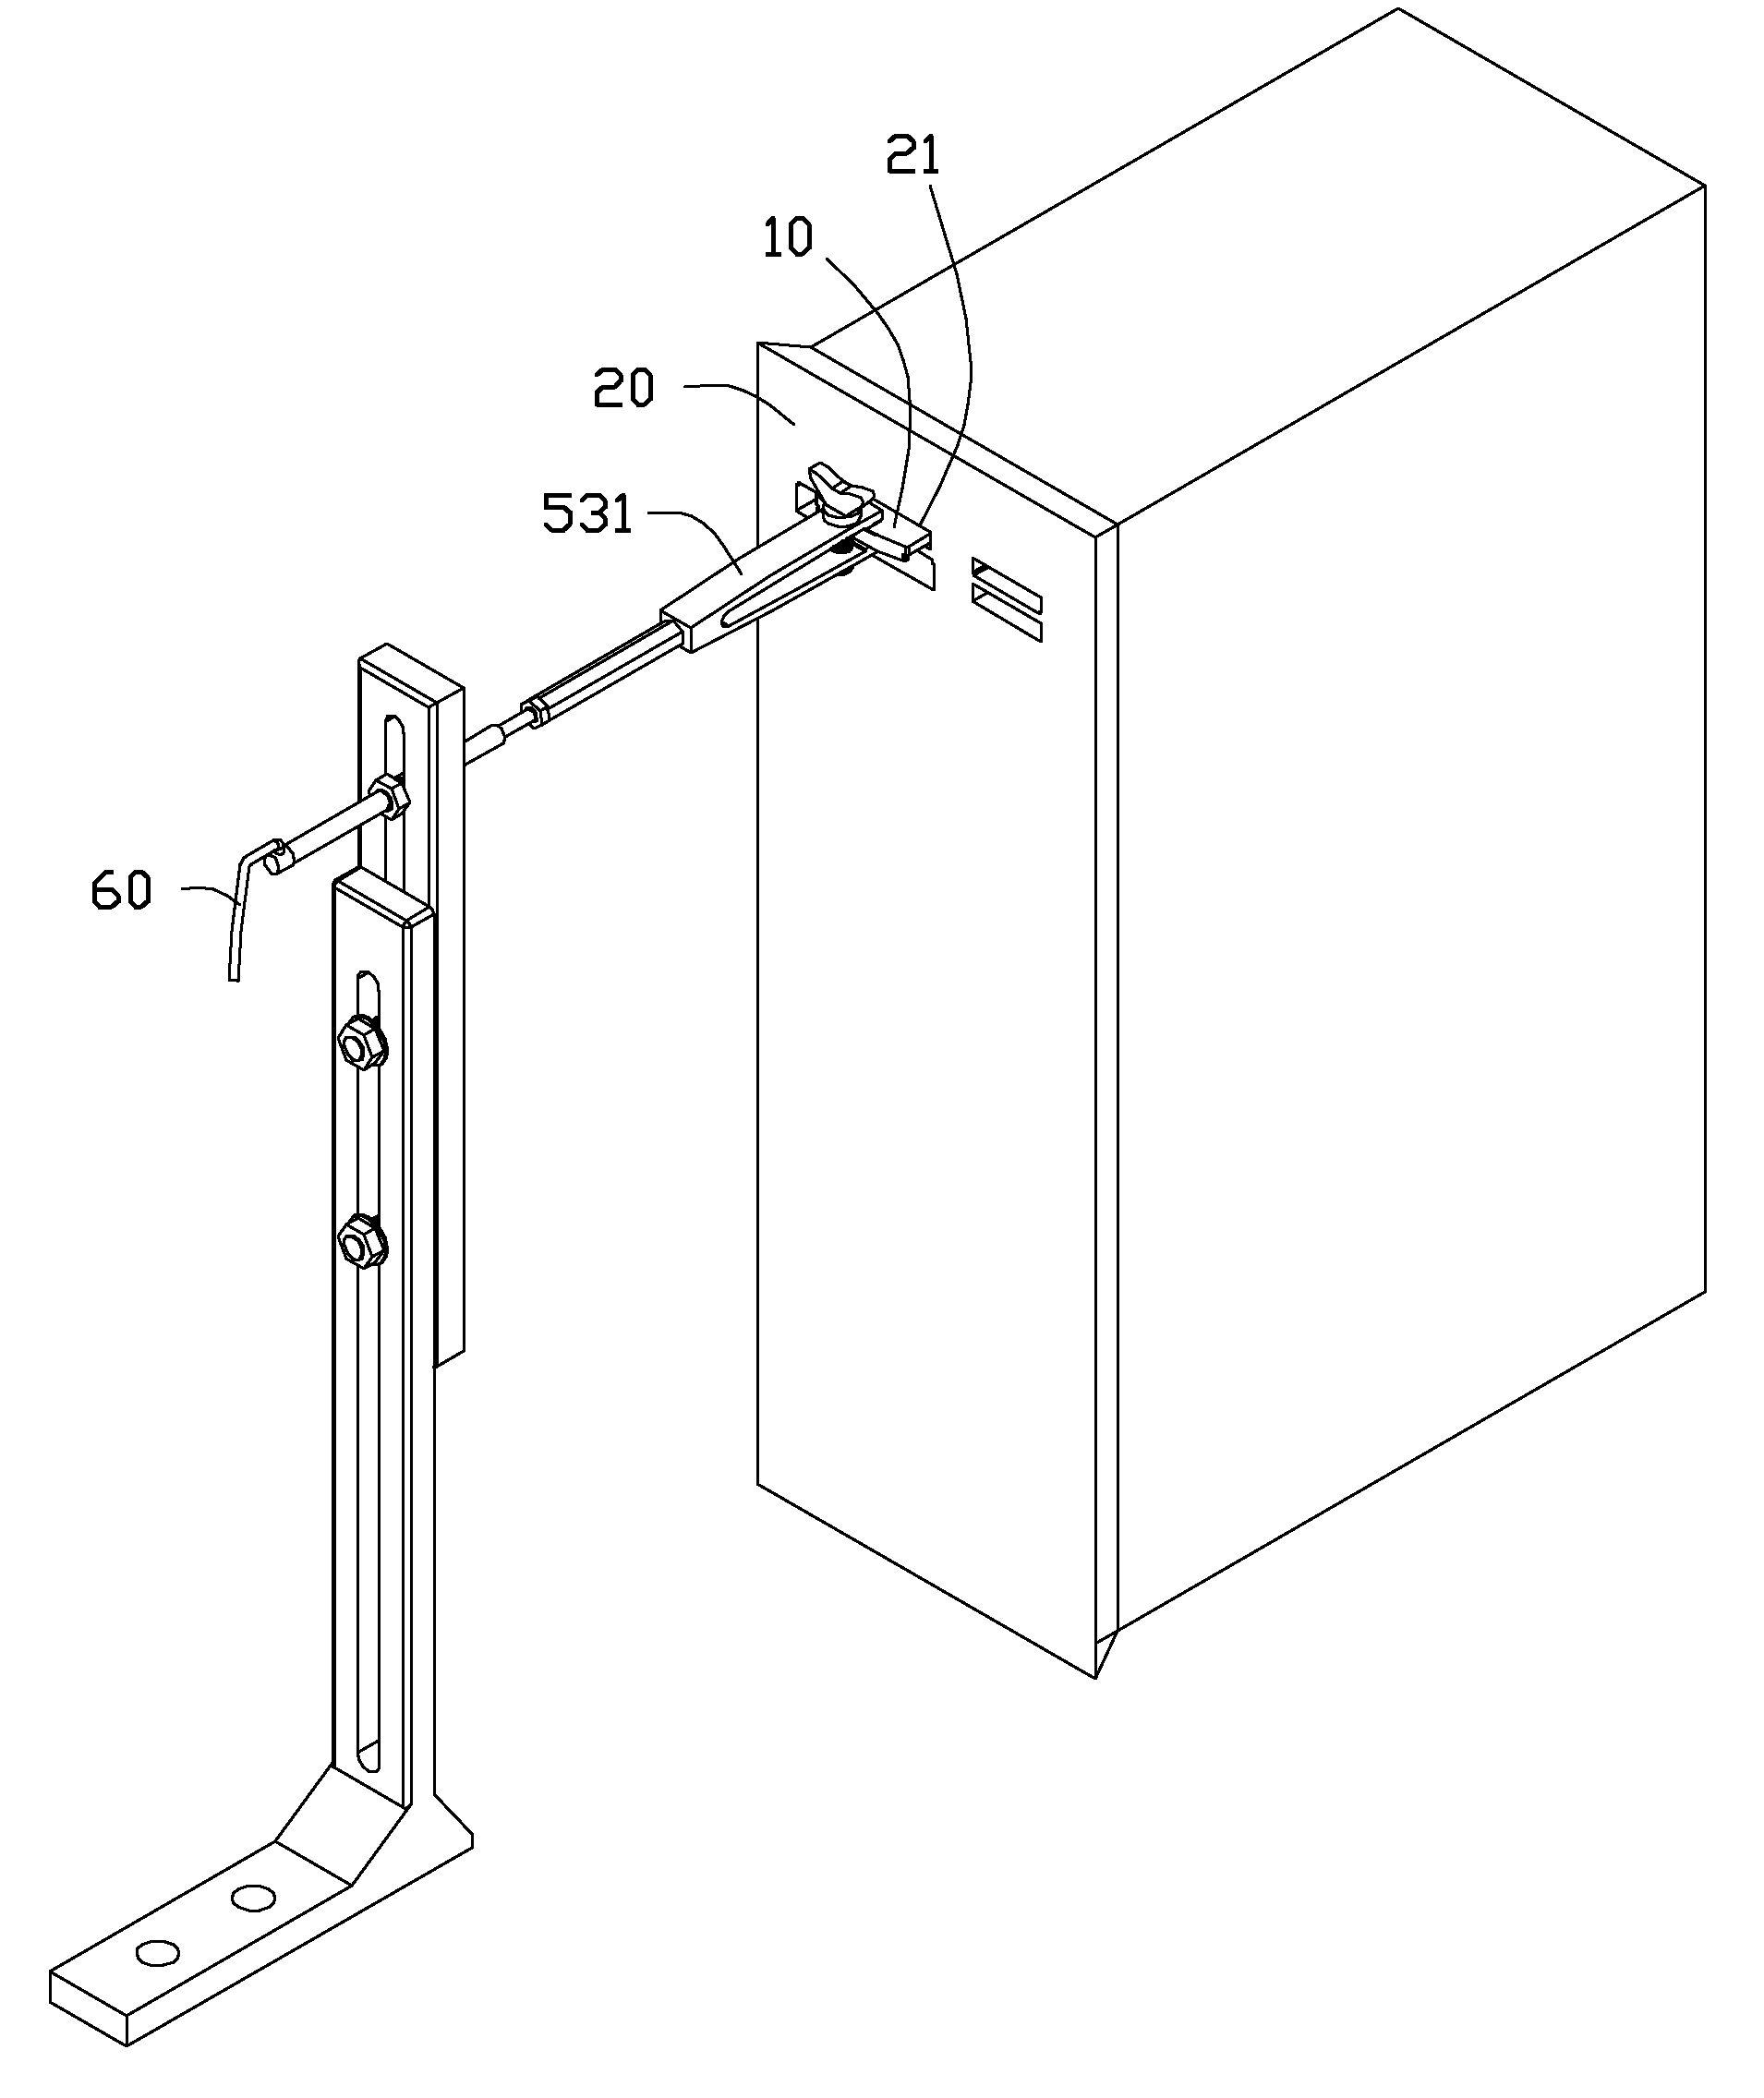 Testing apparatus for extension device